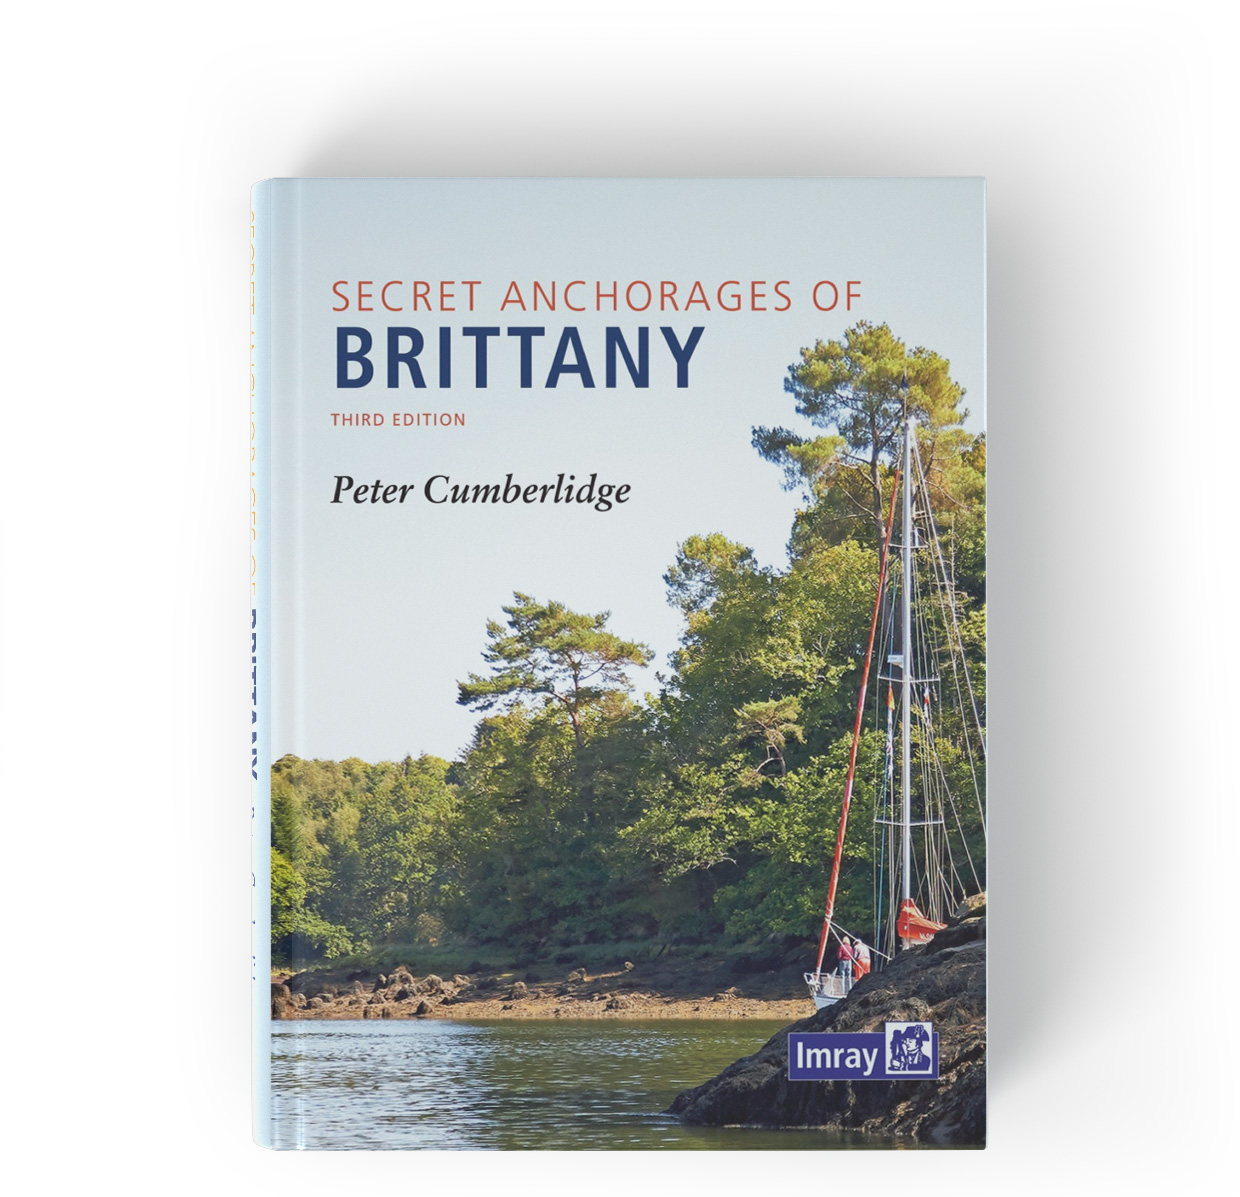 Secret Anchorages of Brittany